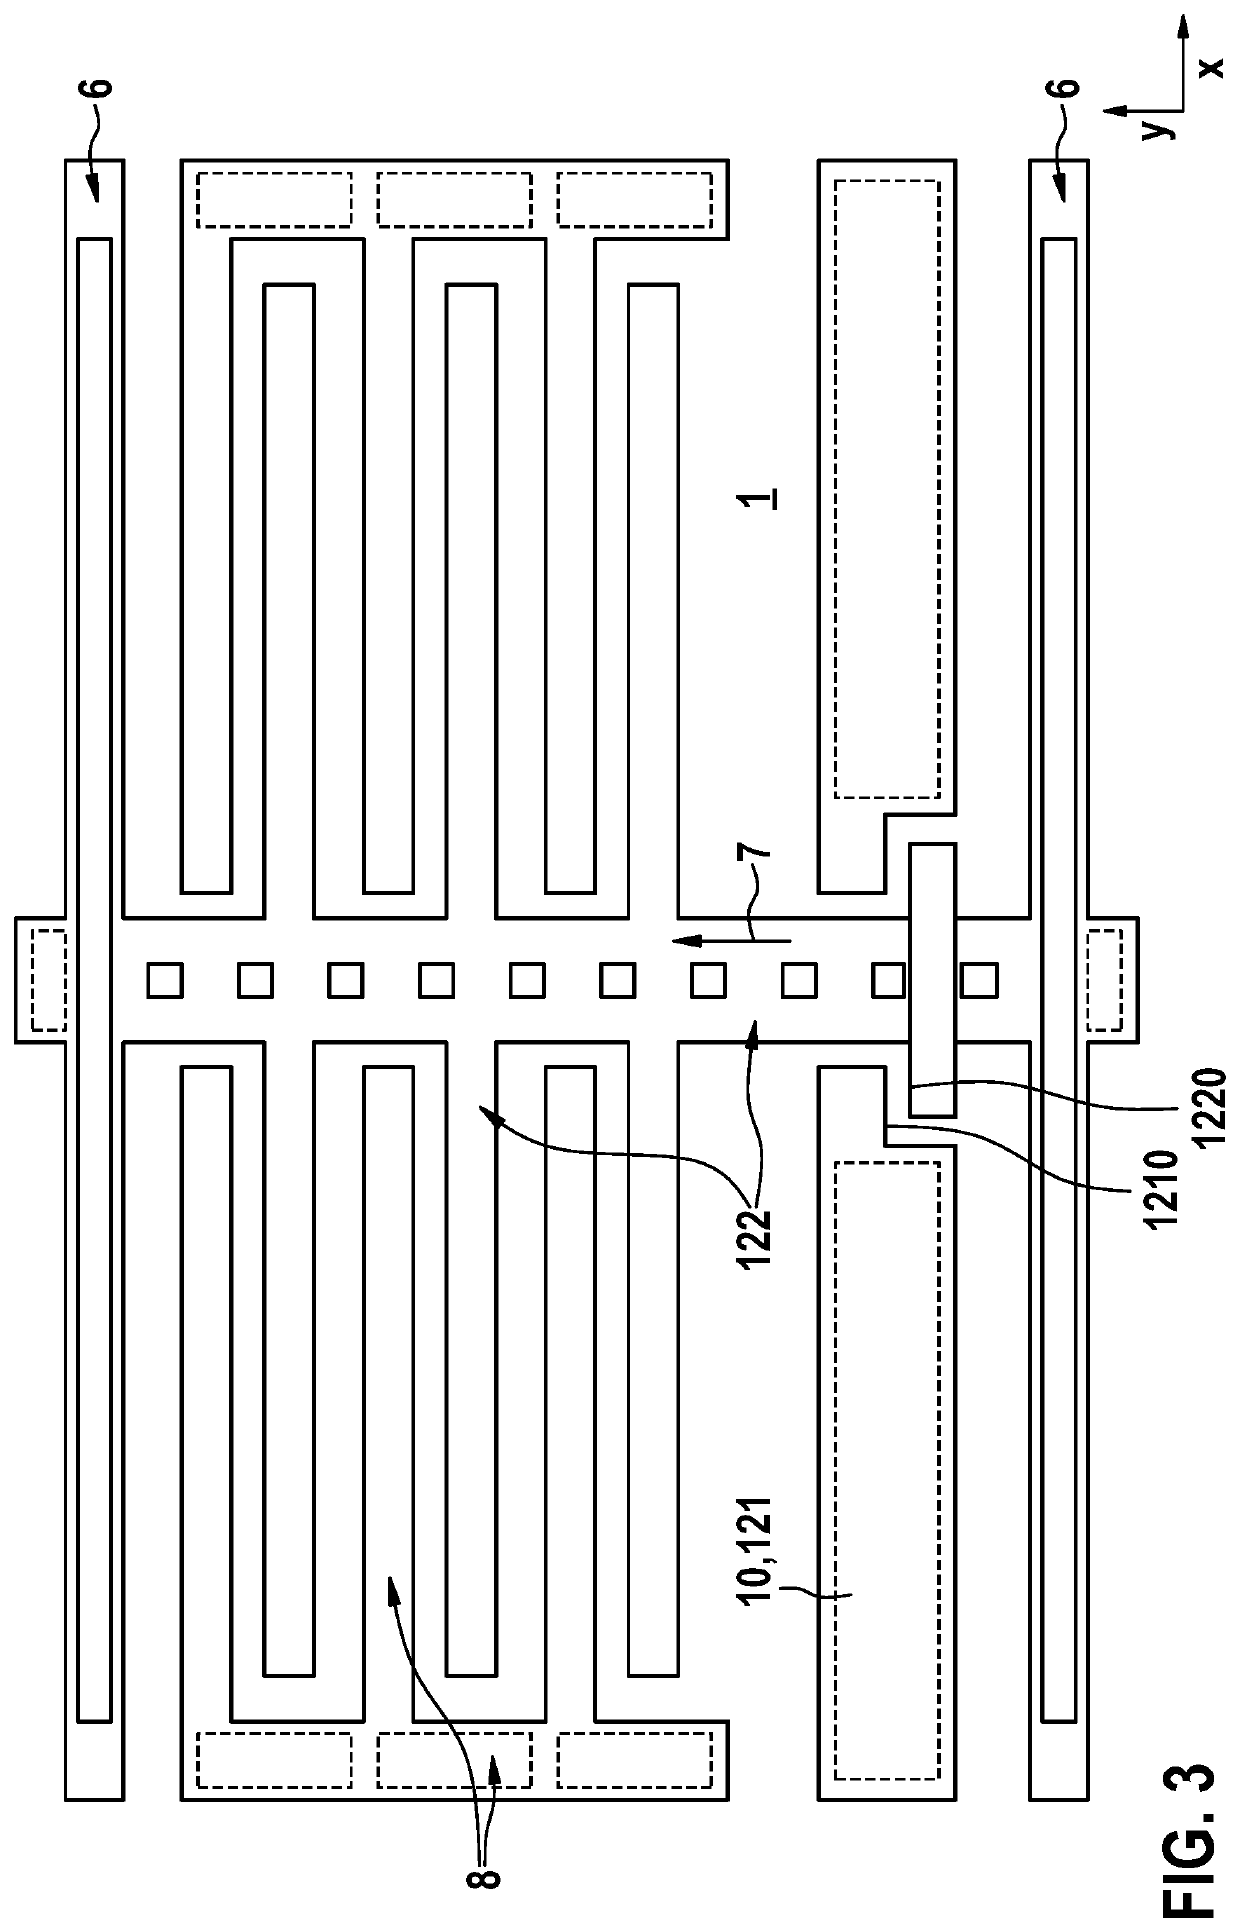 Capacitively operable MEMS switch